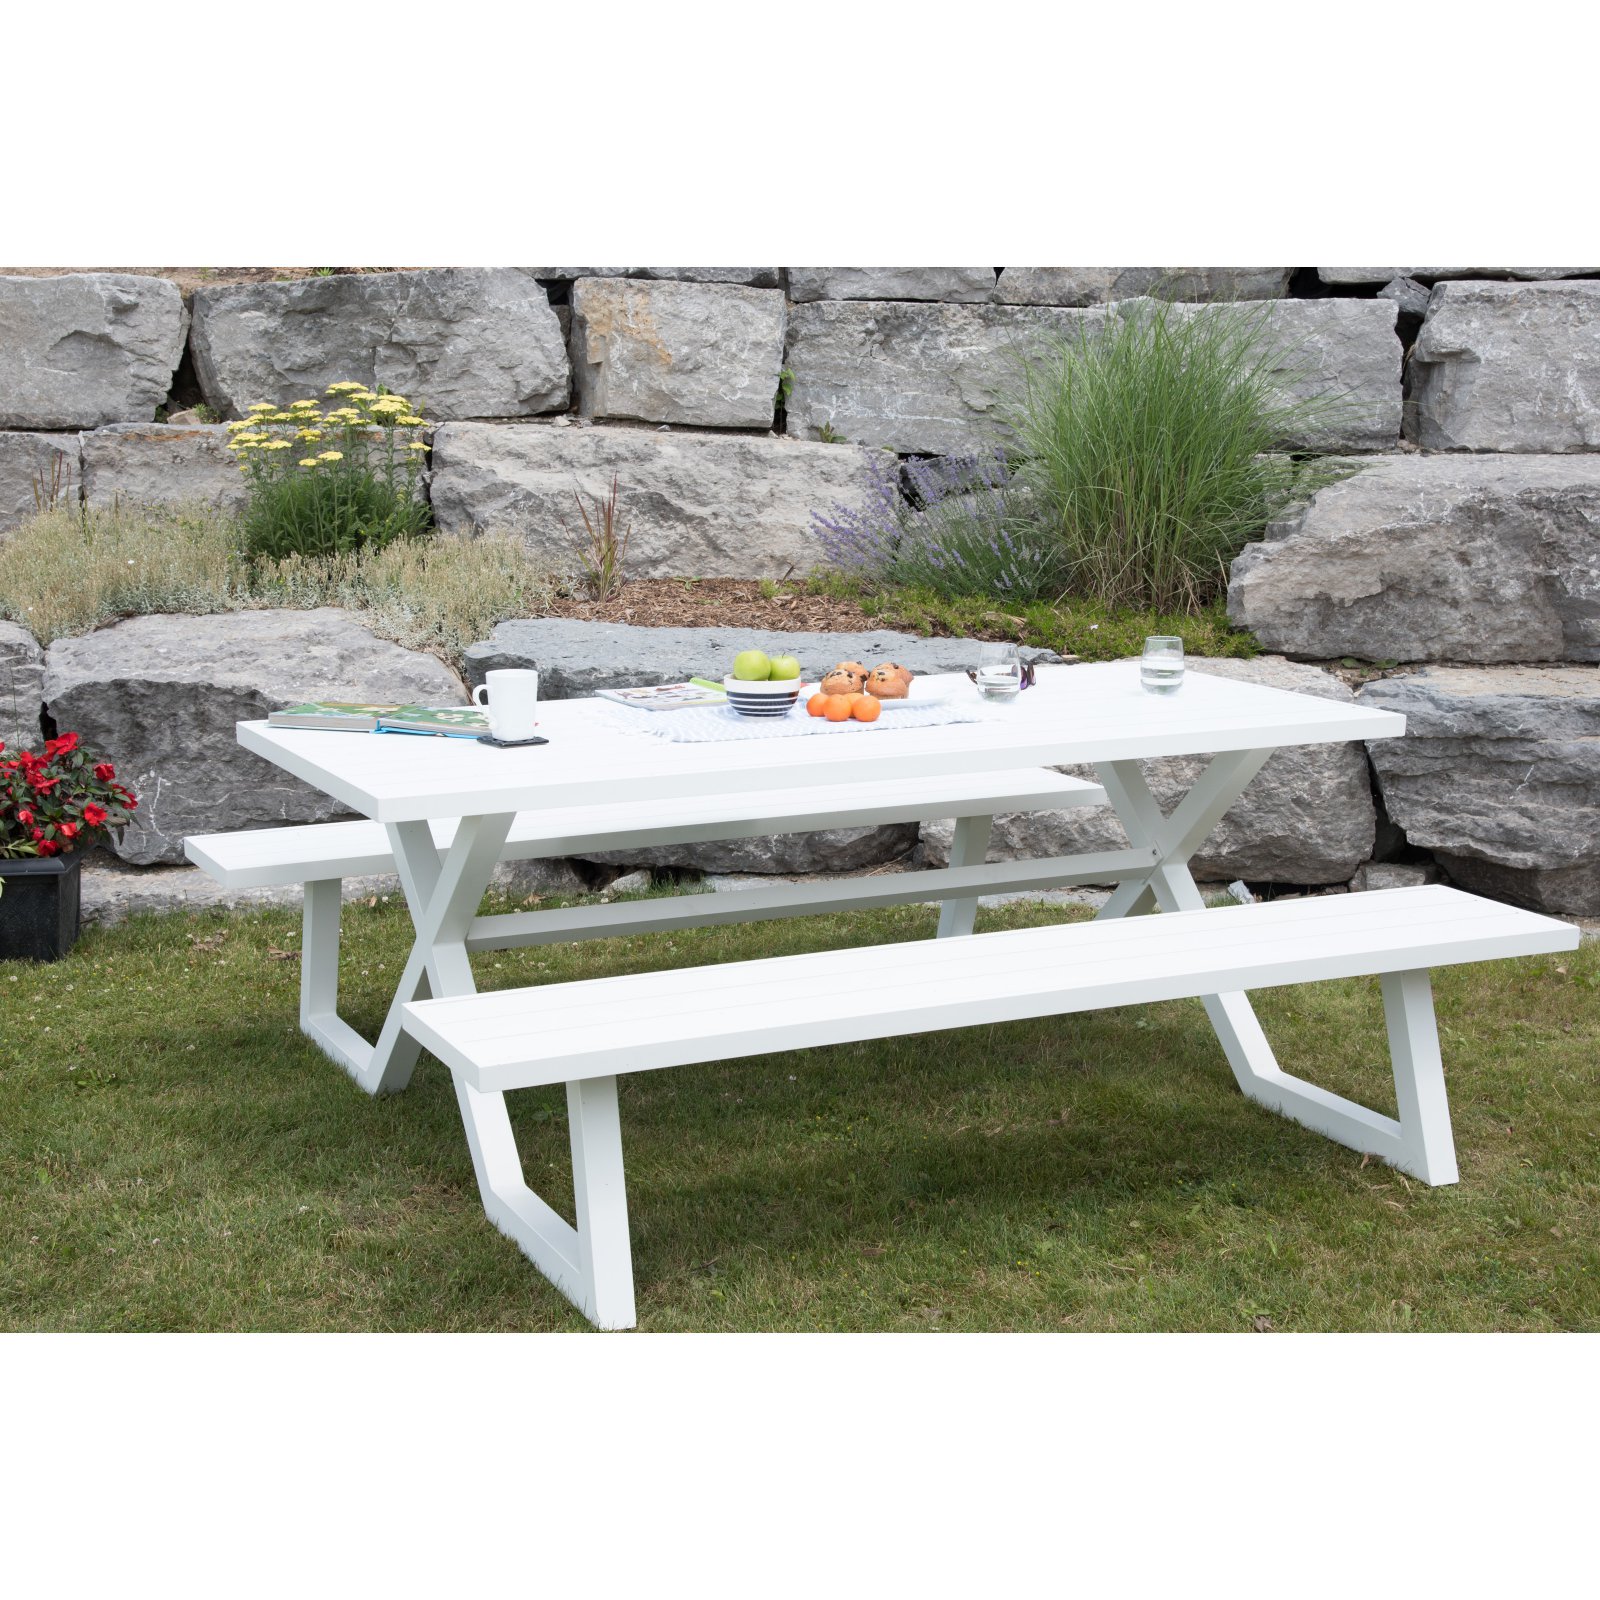 Vivere Banquet Deluxe Picnic Table - image 4 of 4